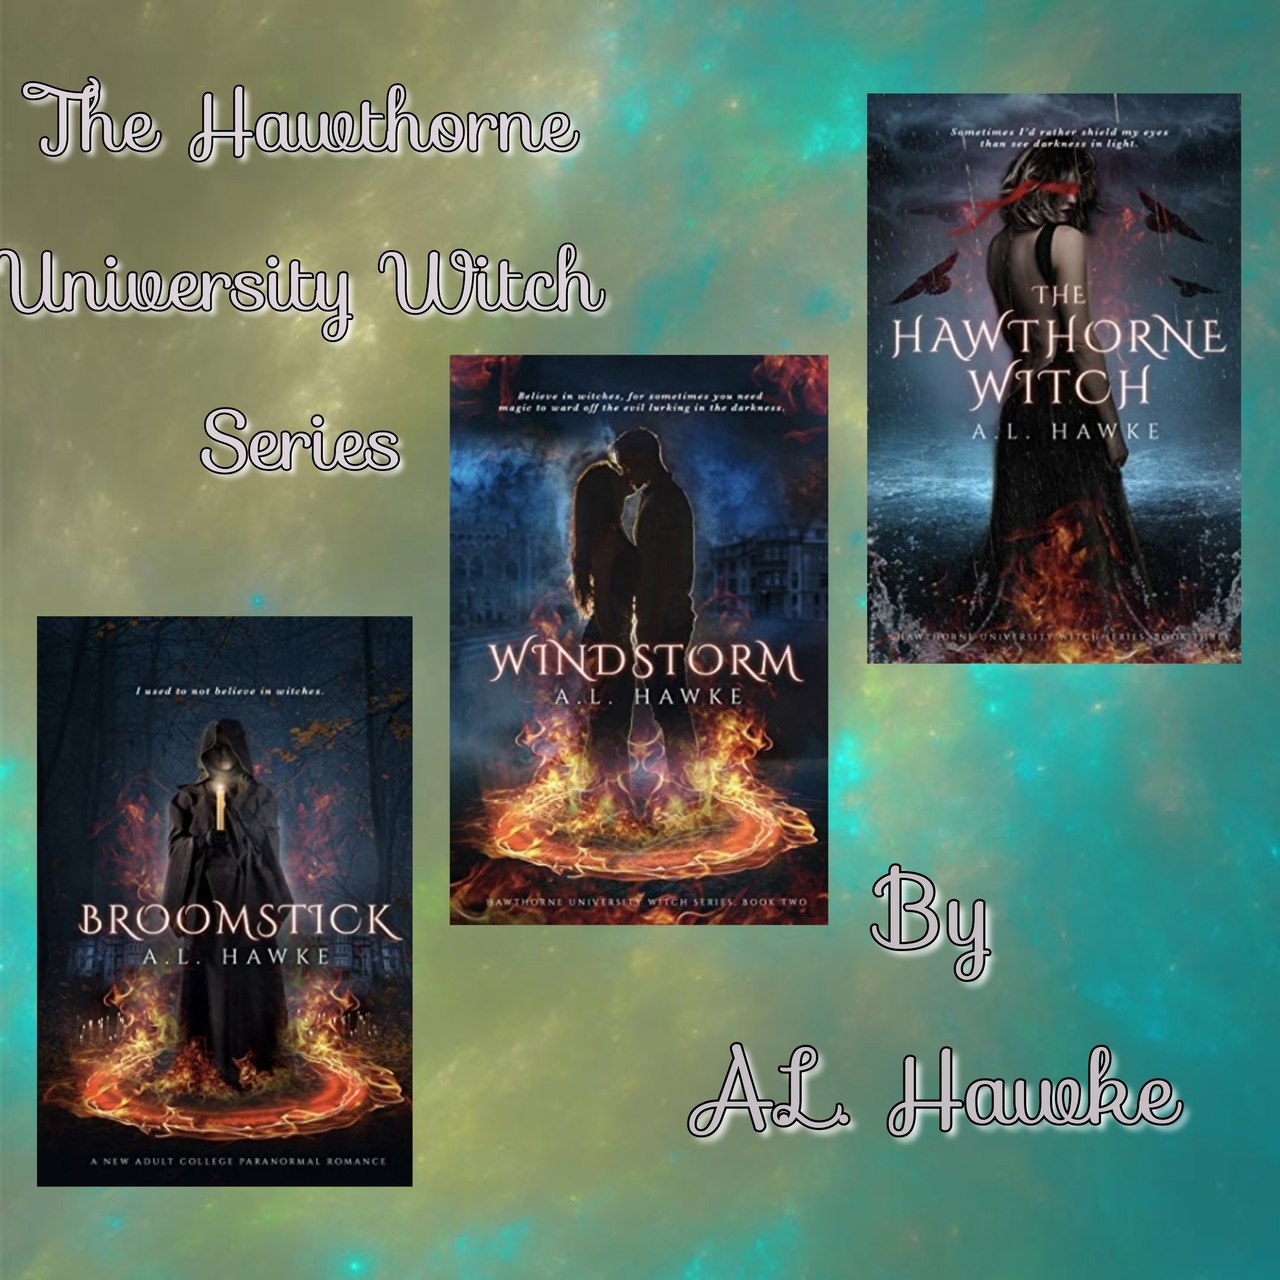 The Hawthorne University Witch series by A.L. Hawke